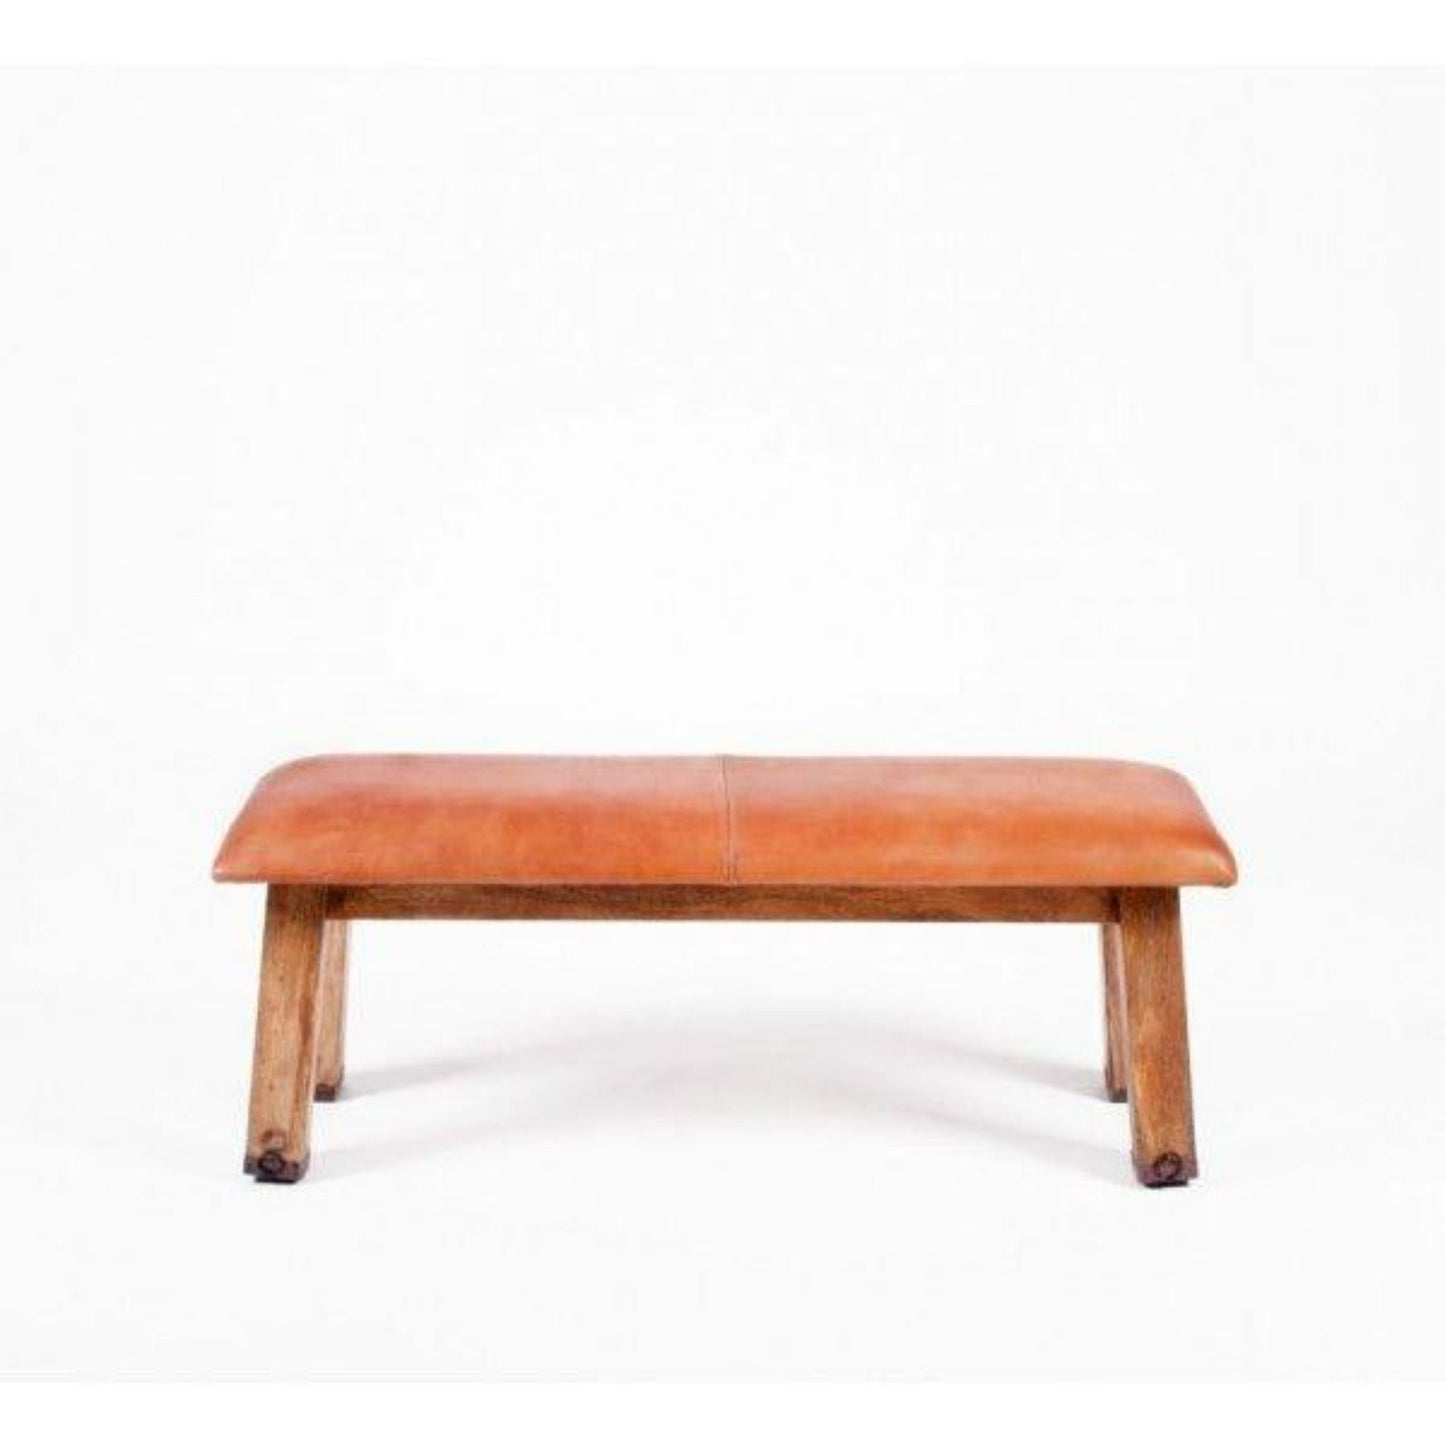 Buck Leather Bench